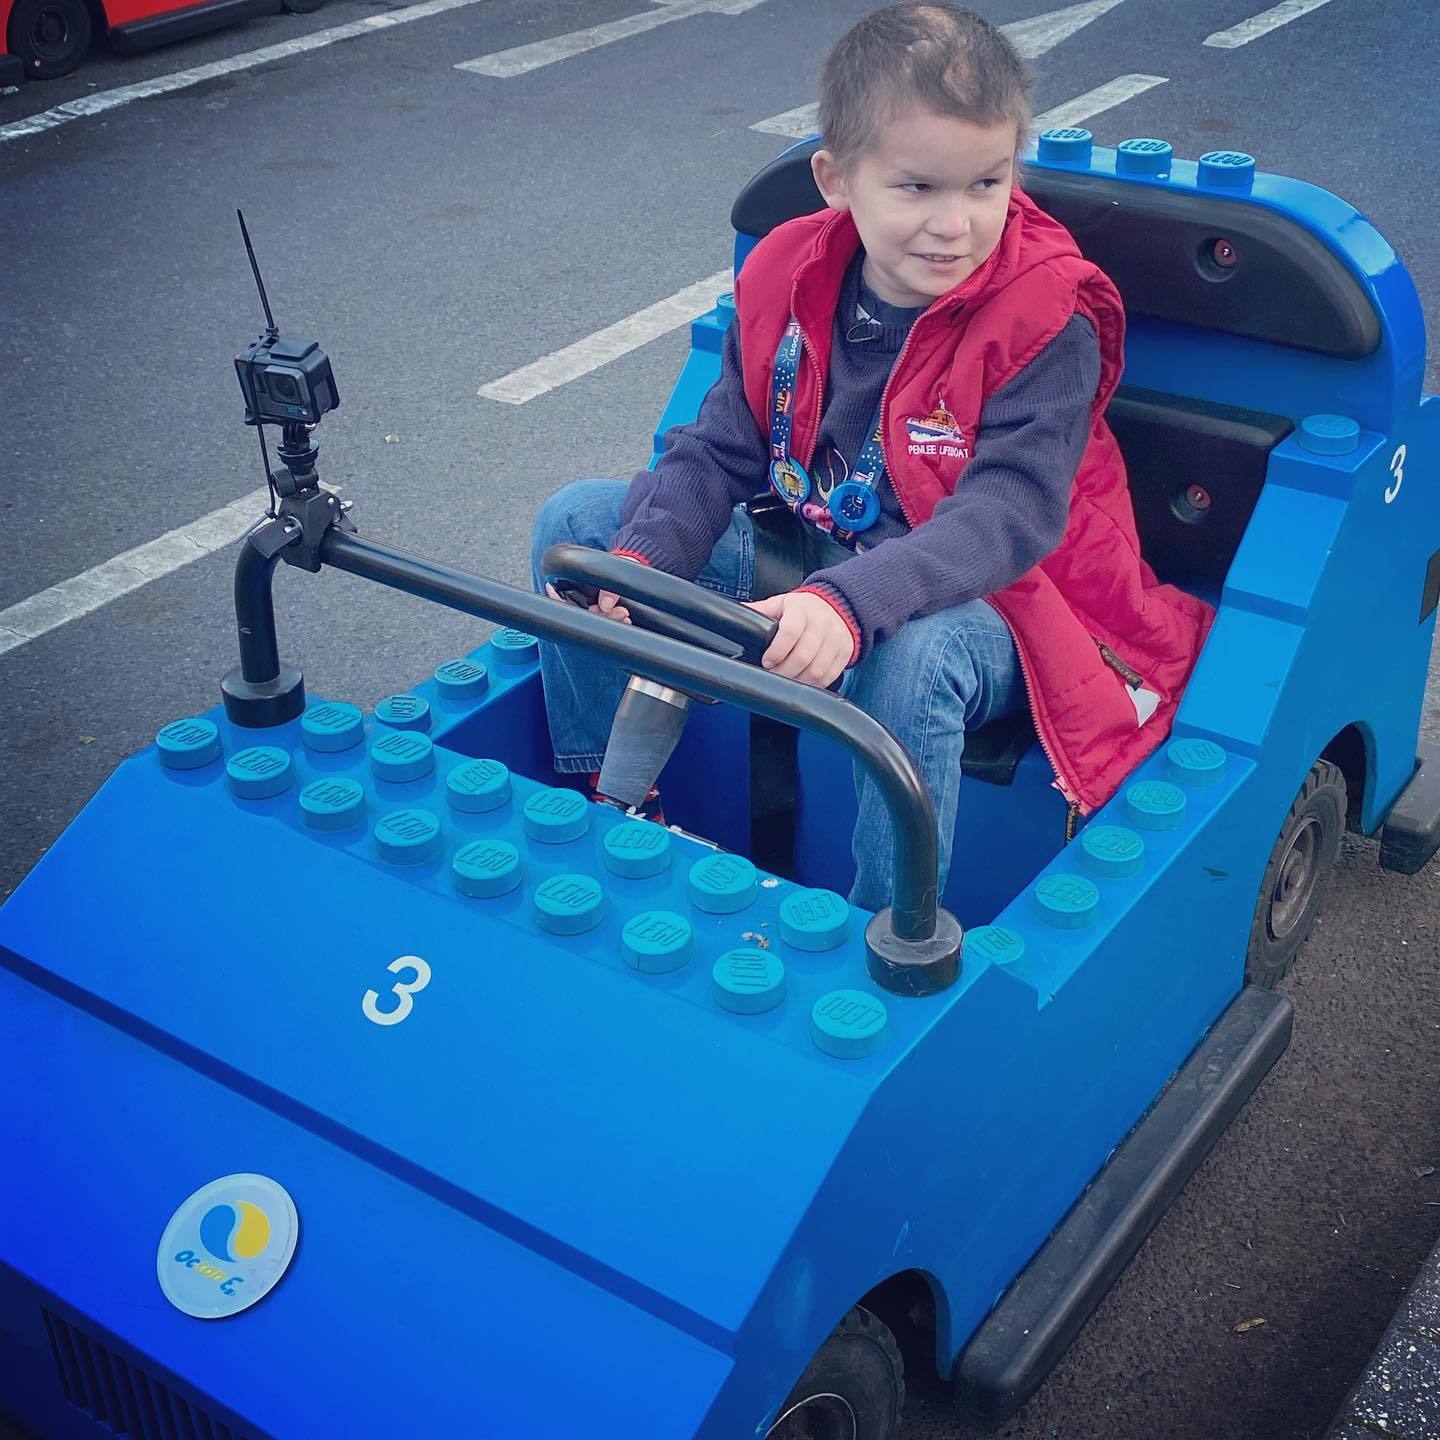 Elliott tries out one of the Legoland go-karts Picture: Samantha Brownfield-Furse